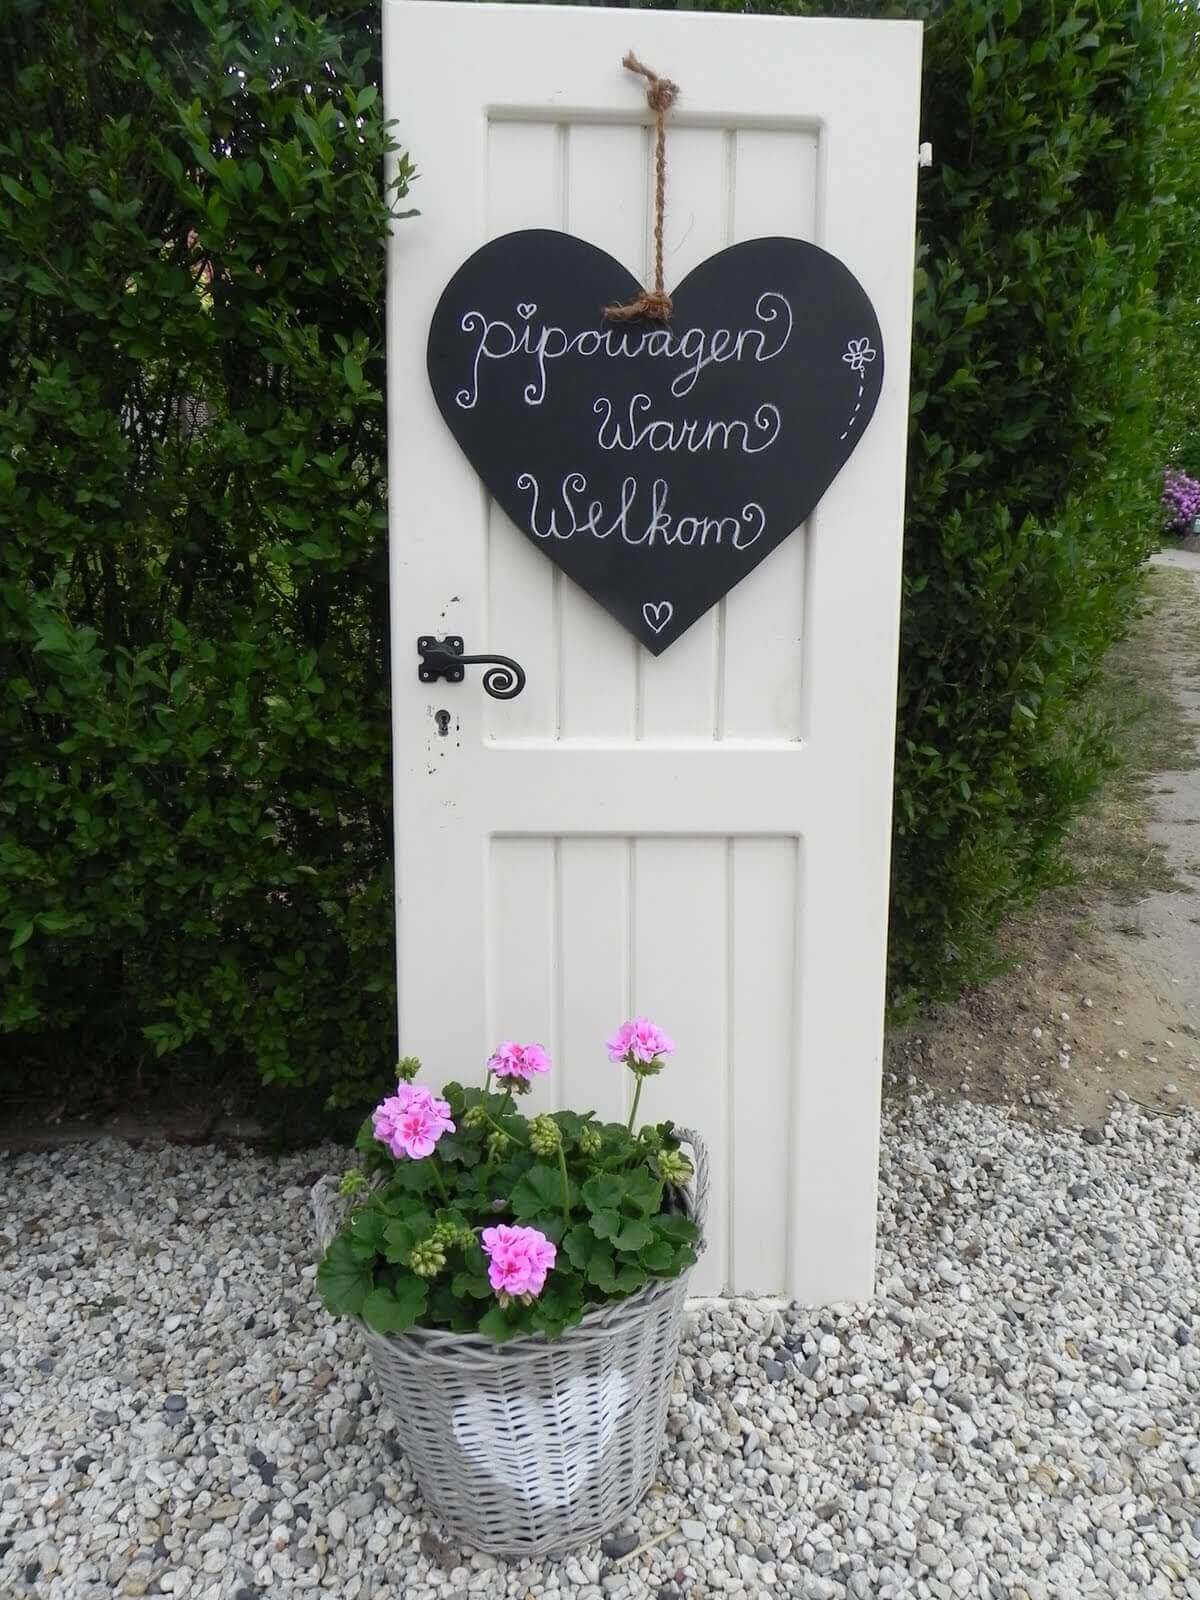 Old Door Outdoor Decor Idea with Chalkboard Signs | Creative Repurposed Old Door Ideas & Projects For Your Backyard